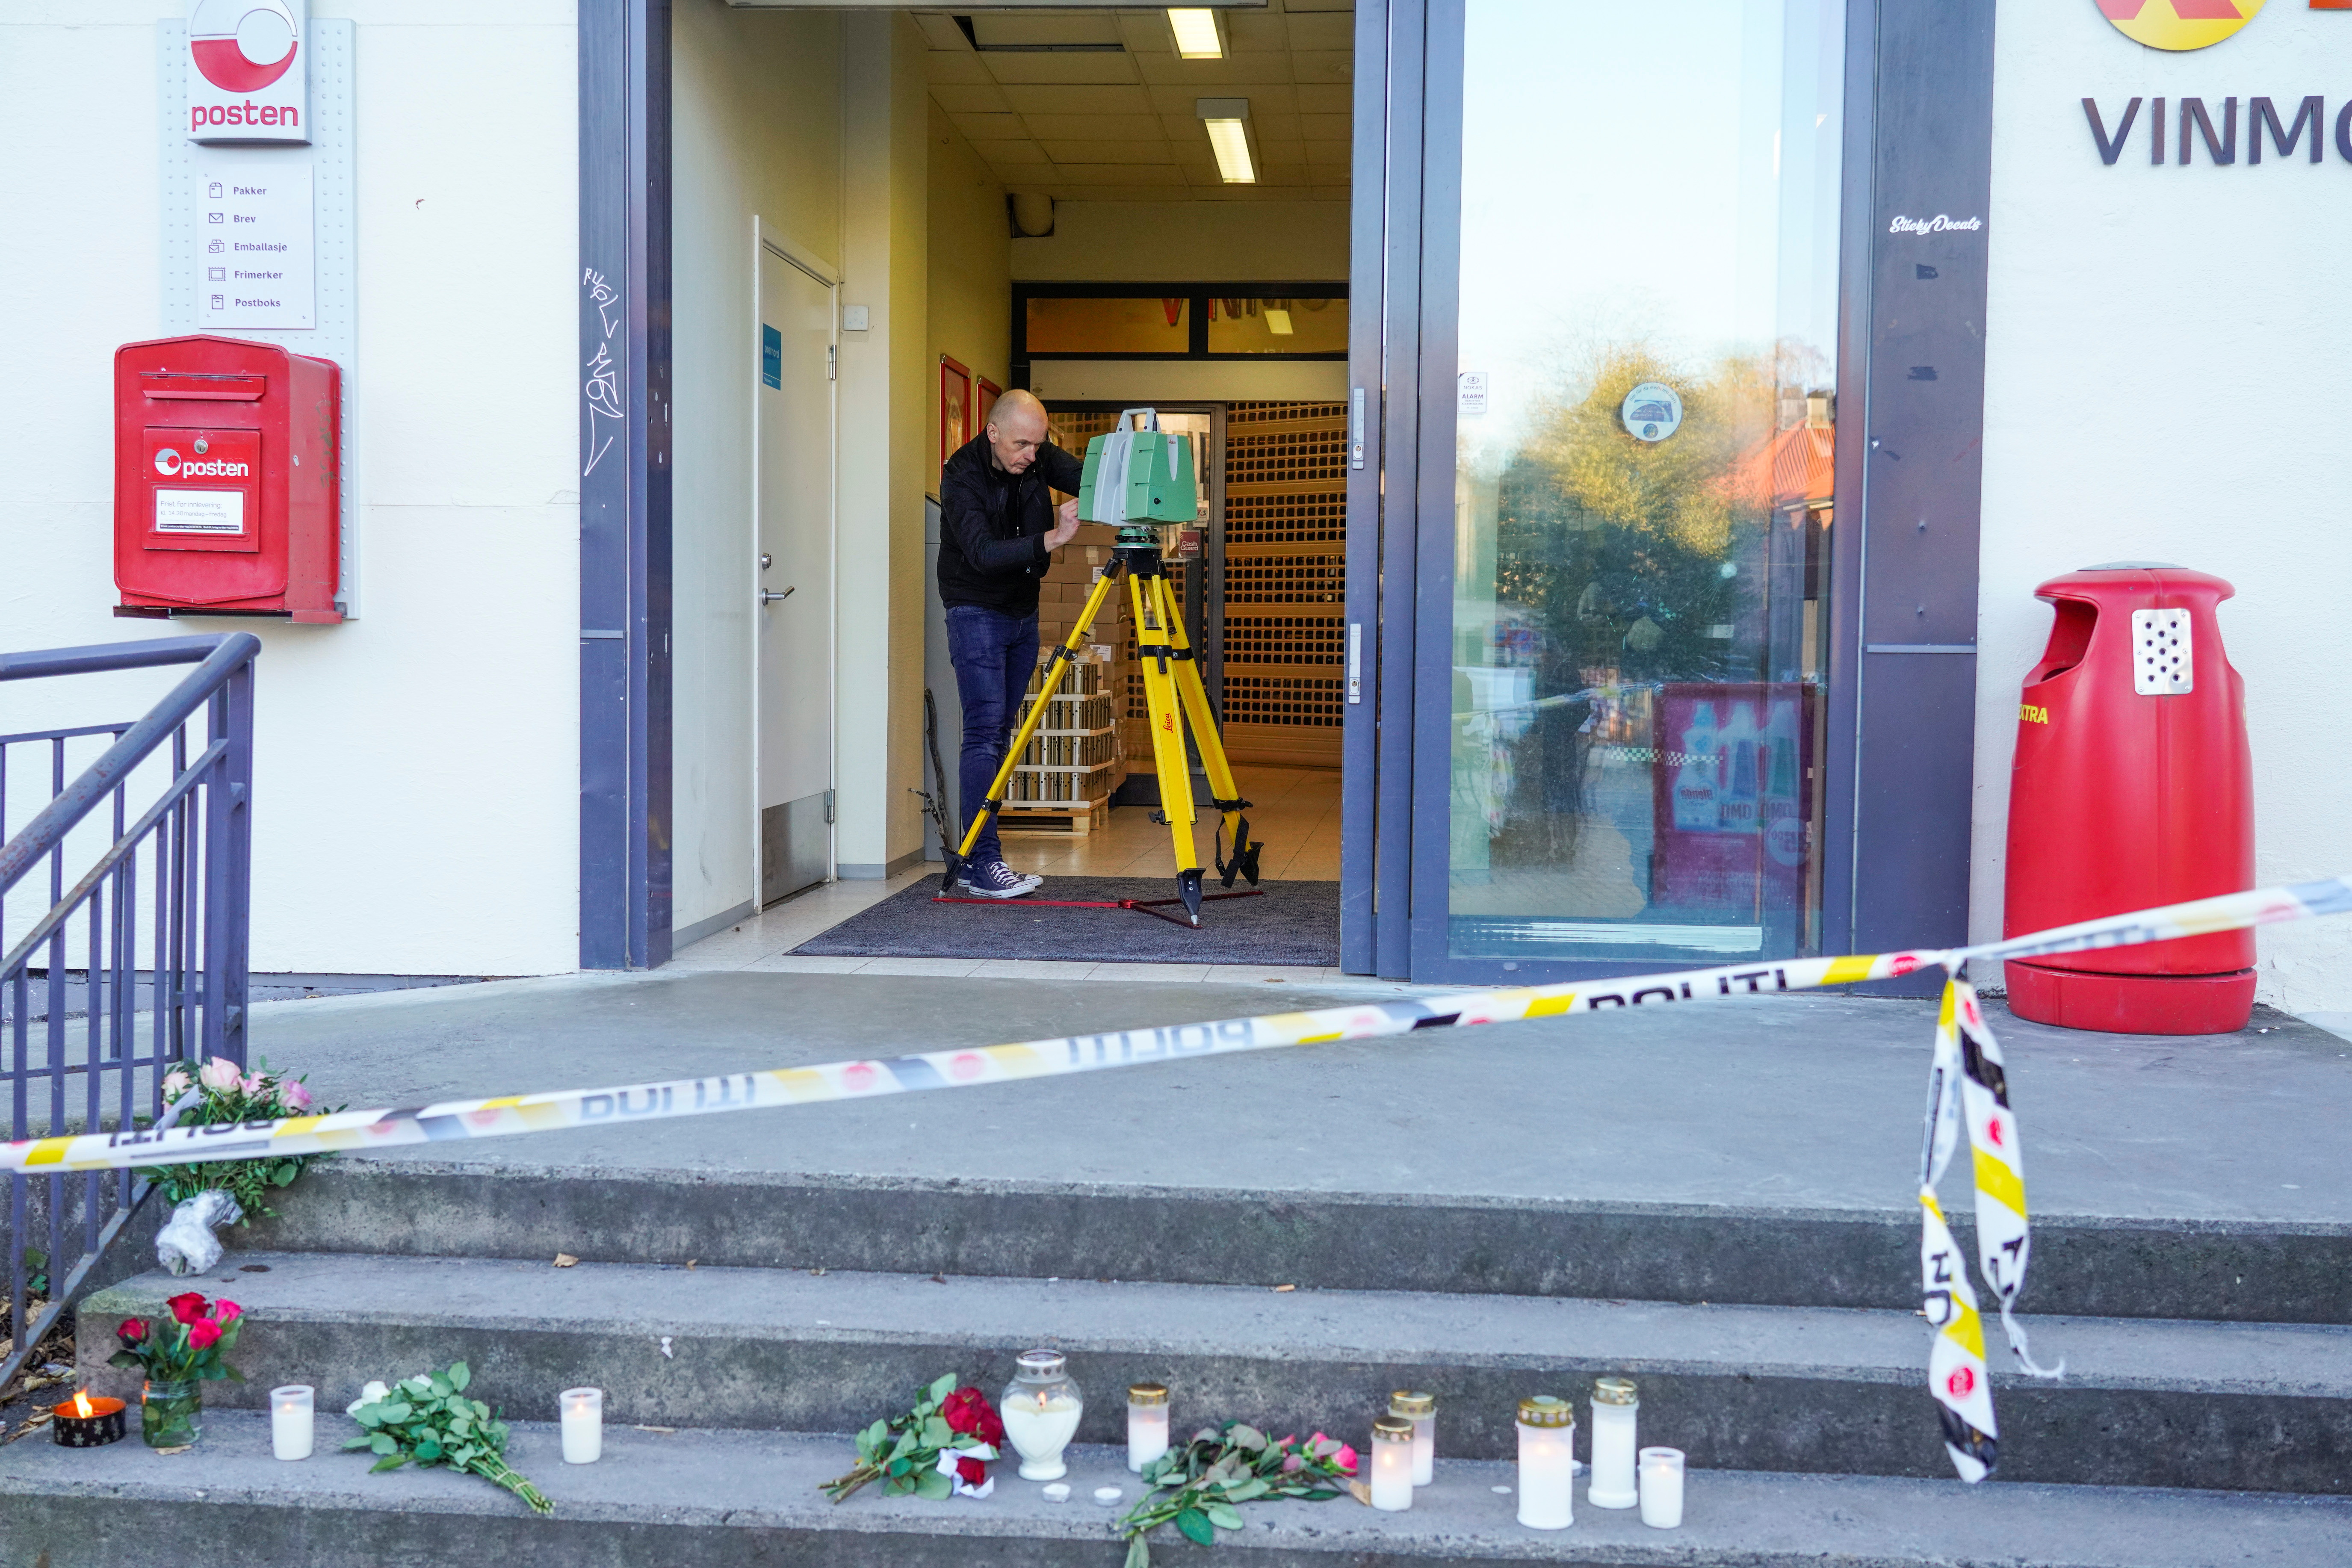 People lay down flowers and light candles after a deadly attack, in Kongsberg